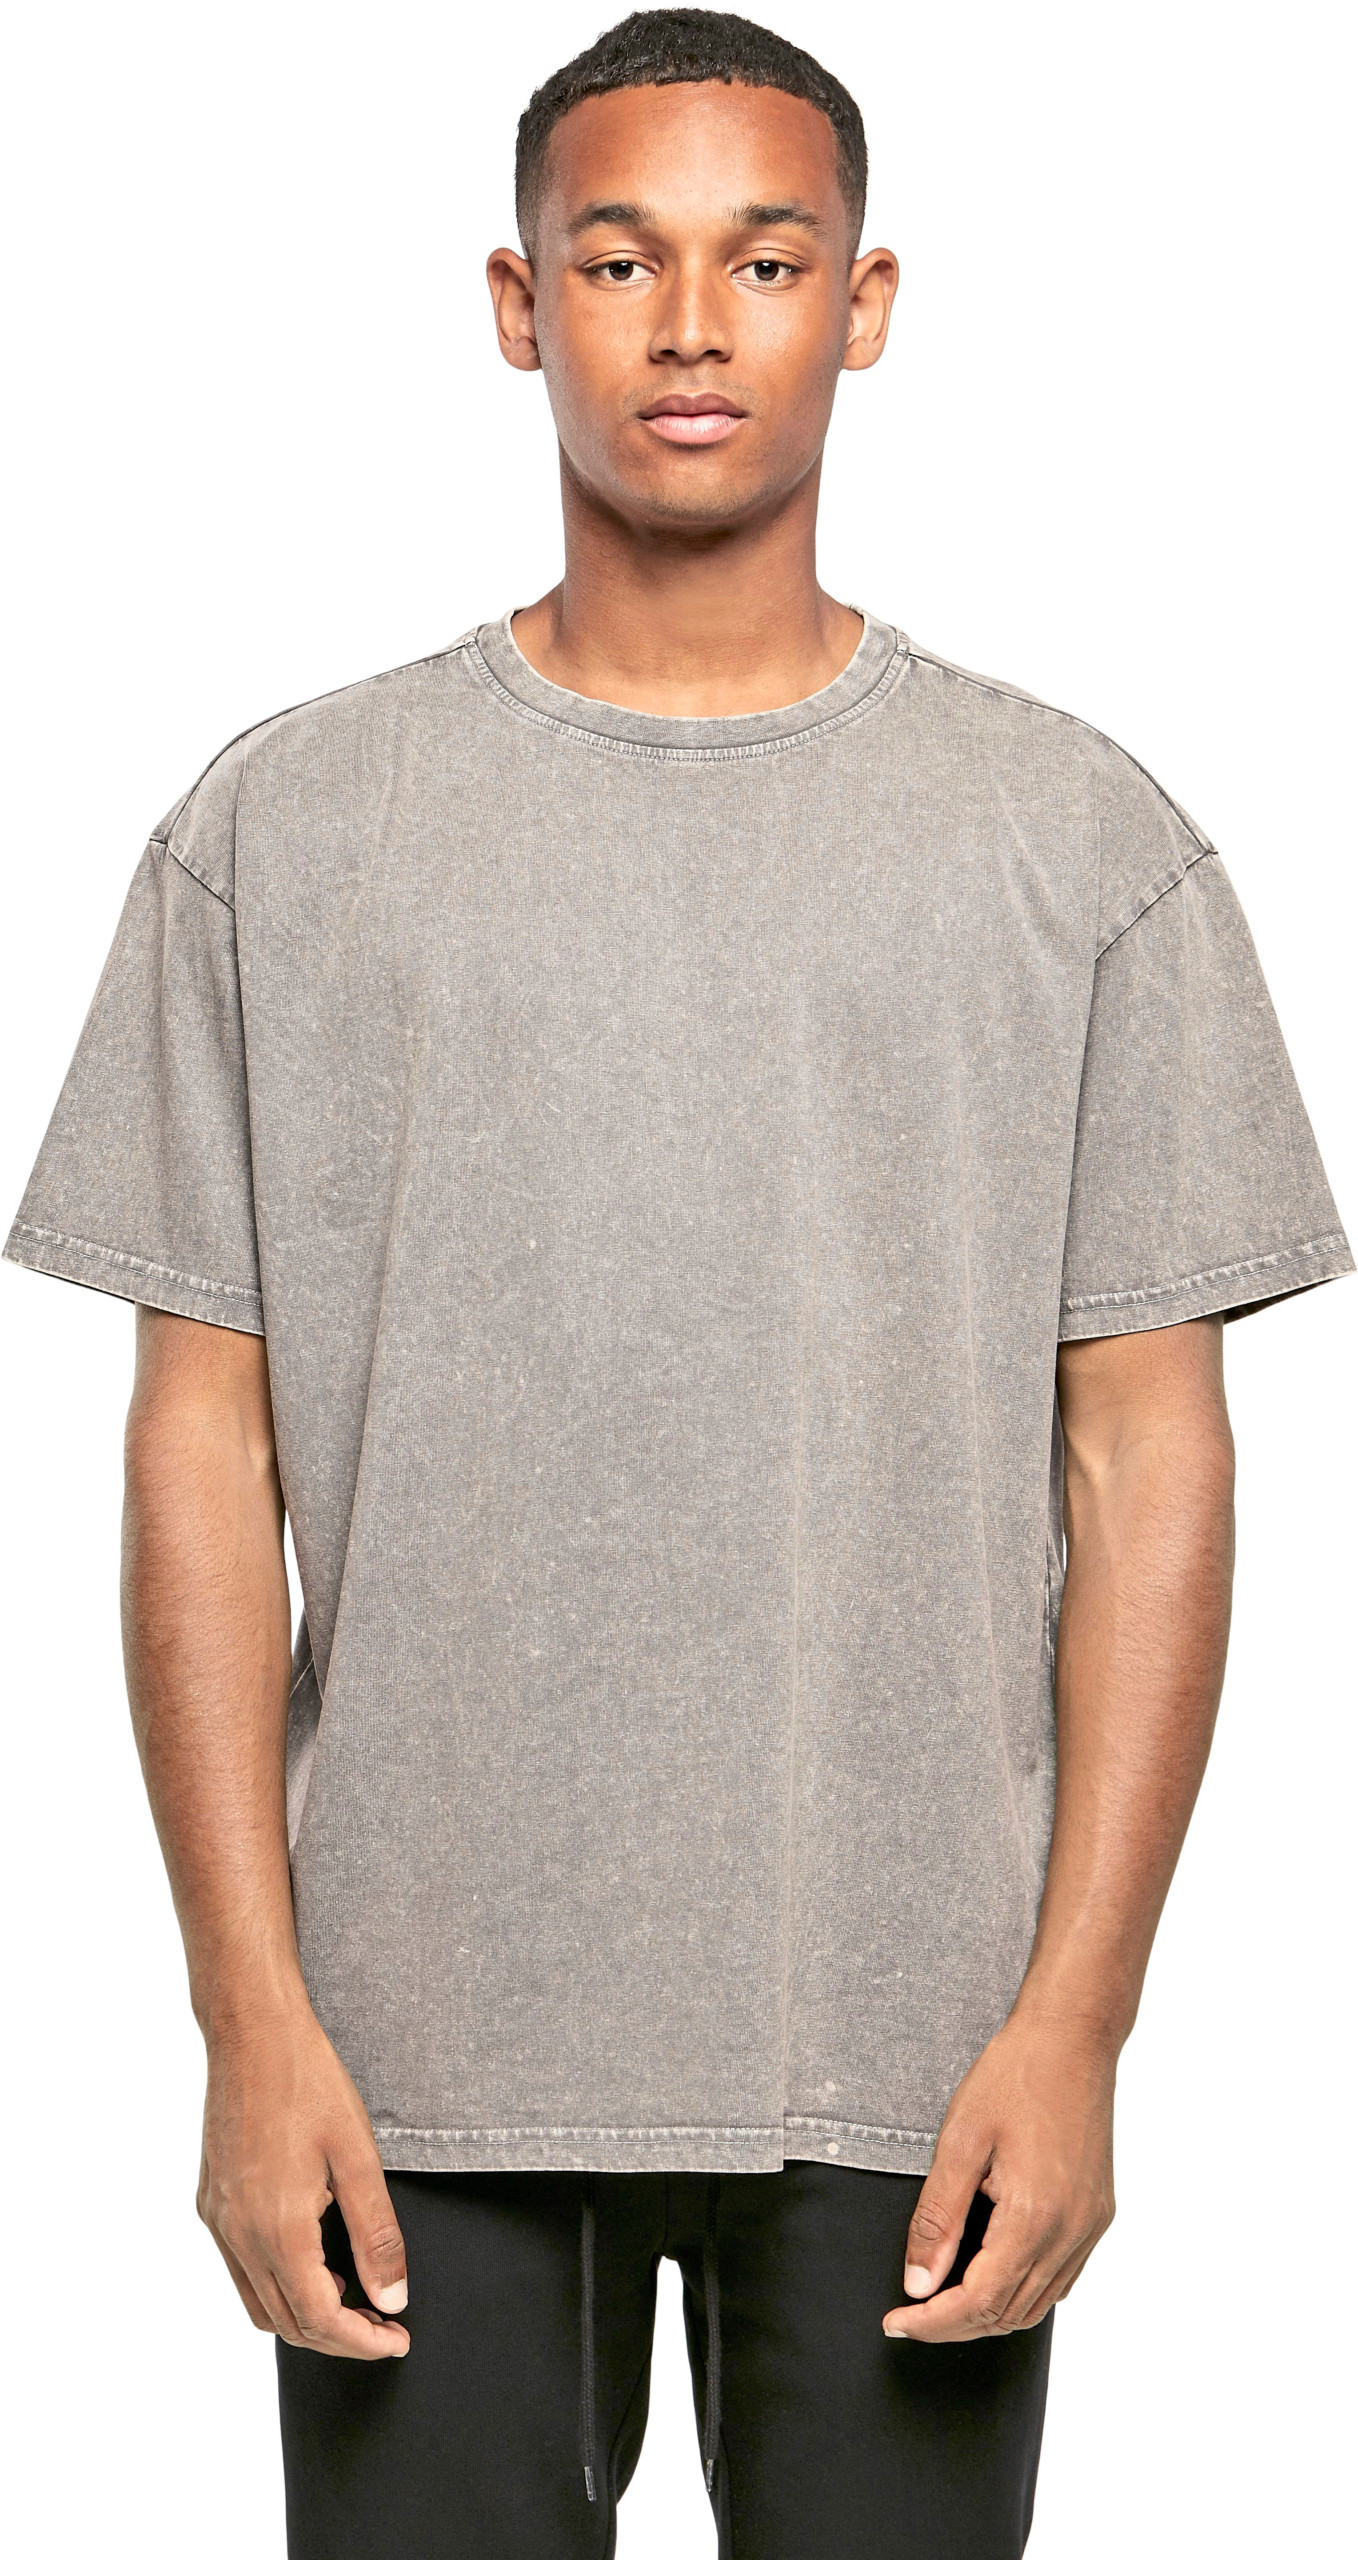 T-Shirts - Build Your Brand - Acid Washed Heavy Oversize Tee - BY189